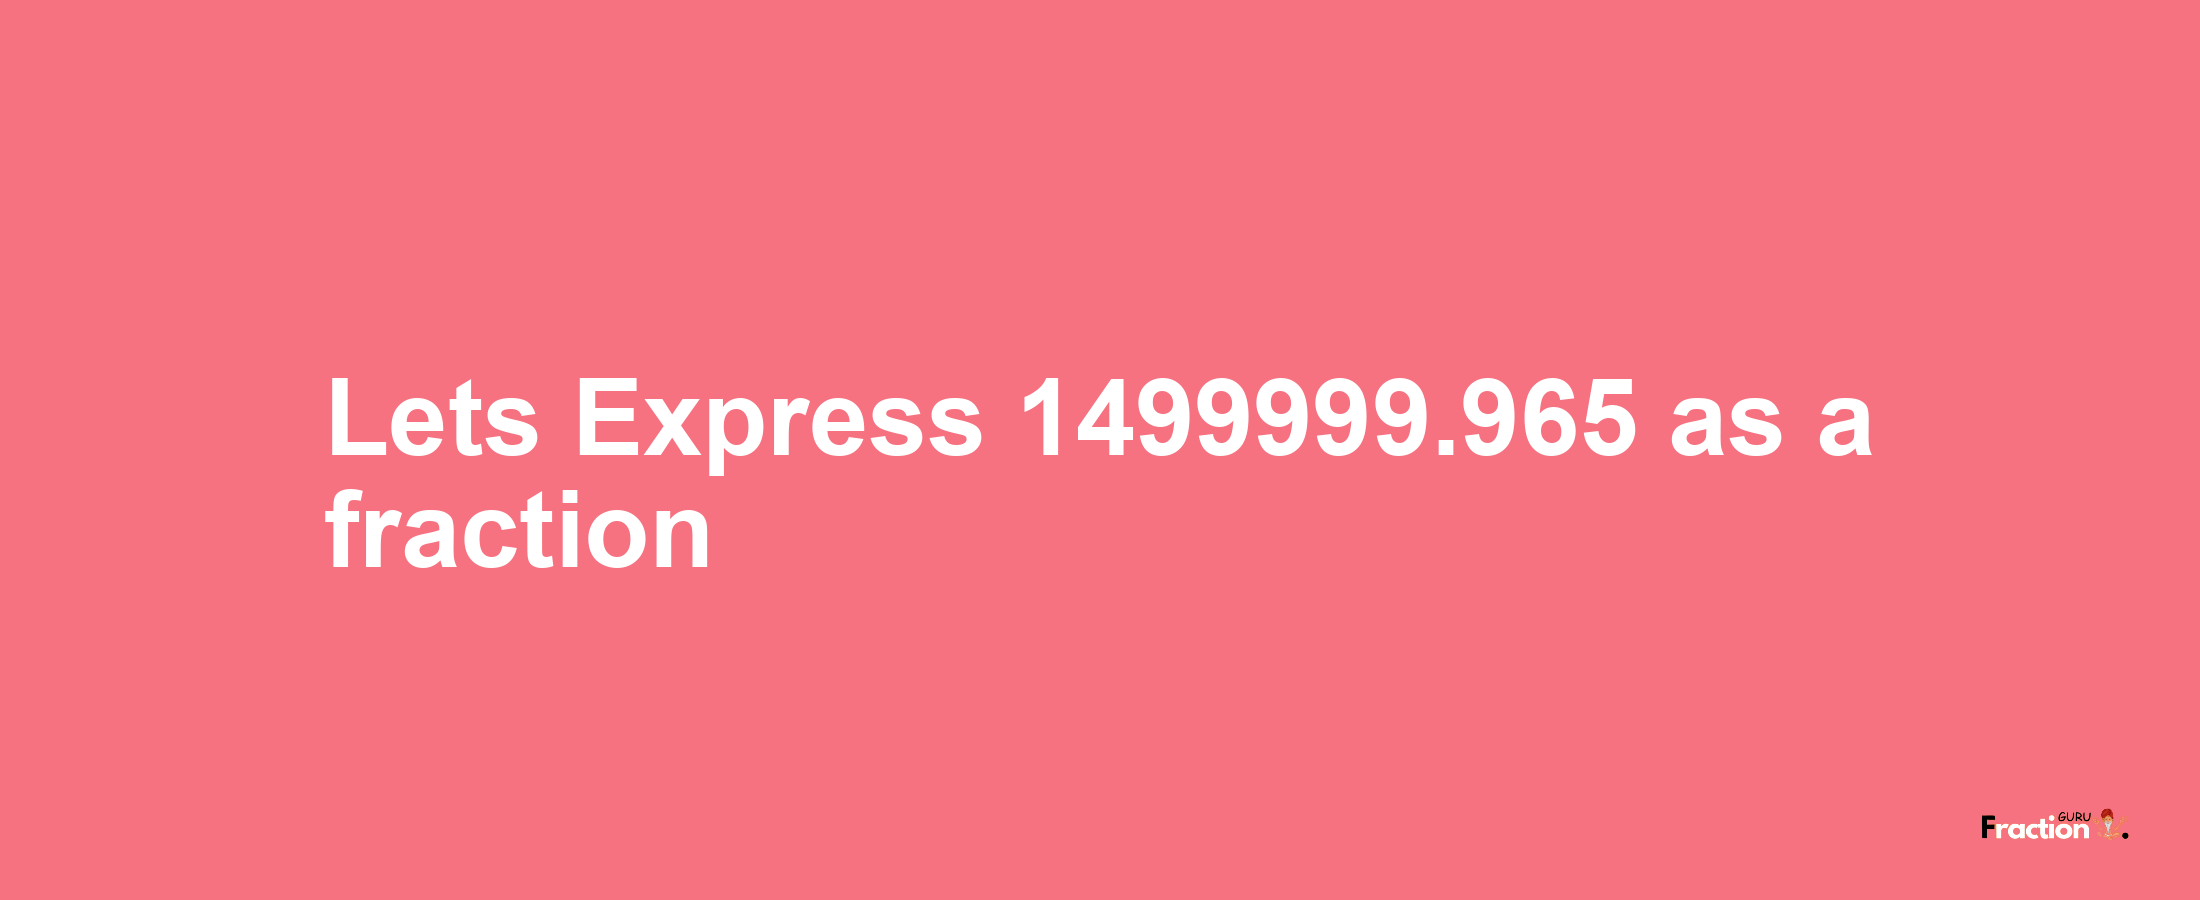 Lets Express 1499999.965 as afraction